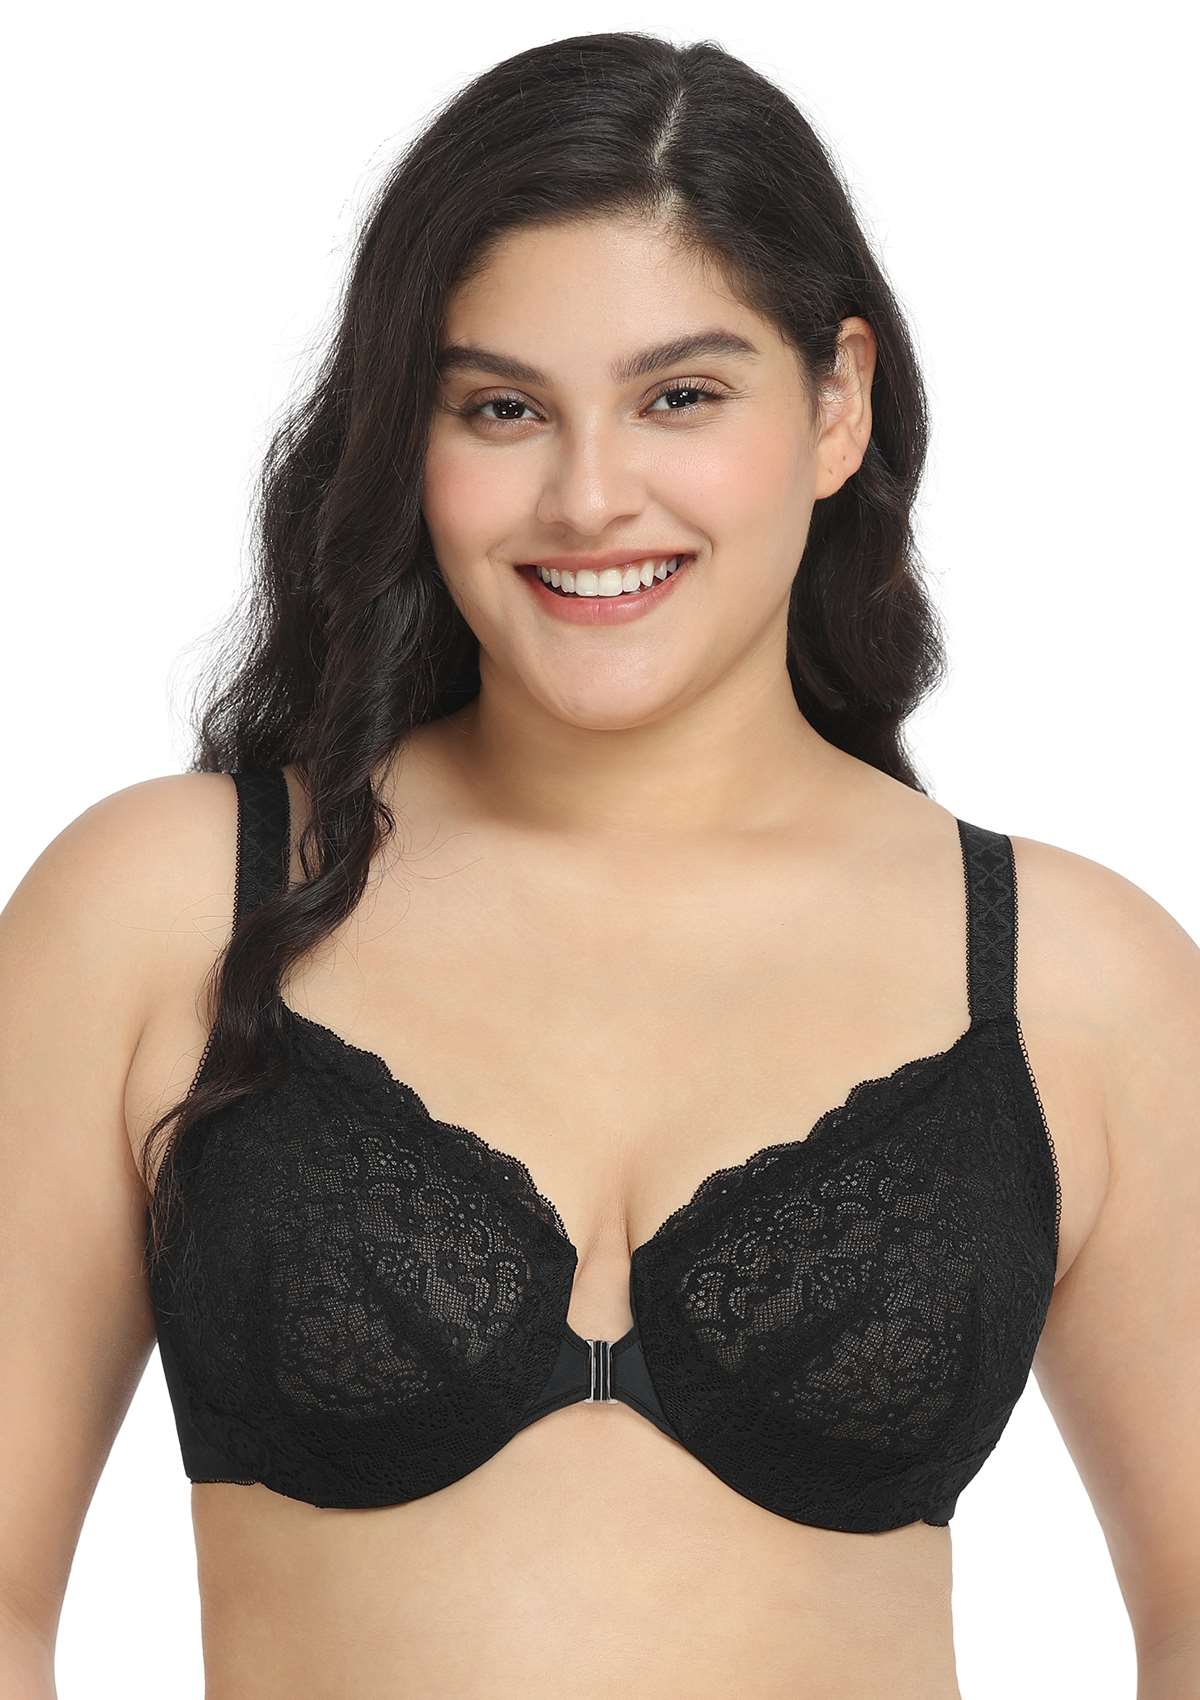 HSIA Nymphaea Front-Close Unlined Retro Floral Lace Back Smoothing Bra - Black / 34 / D